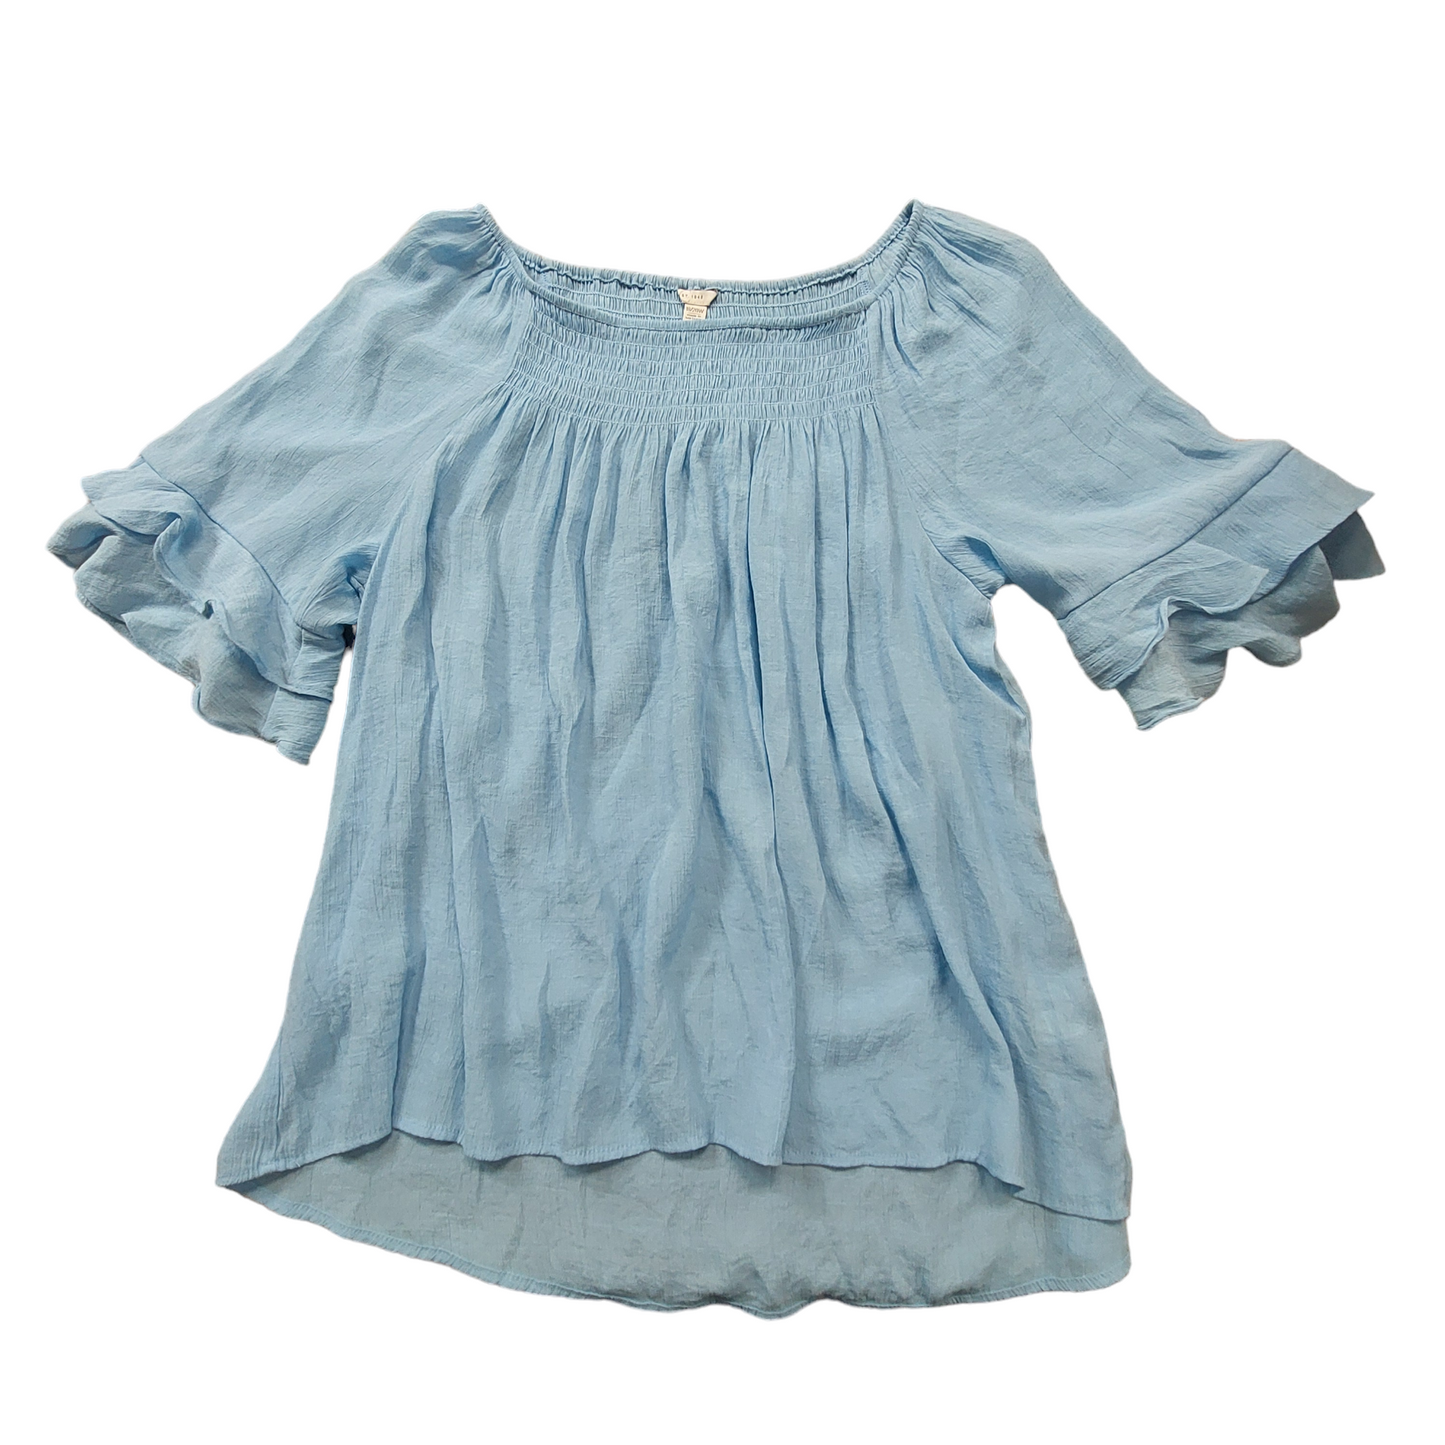 Blue Top Short Sleeve Cato, Size 1x